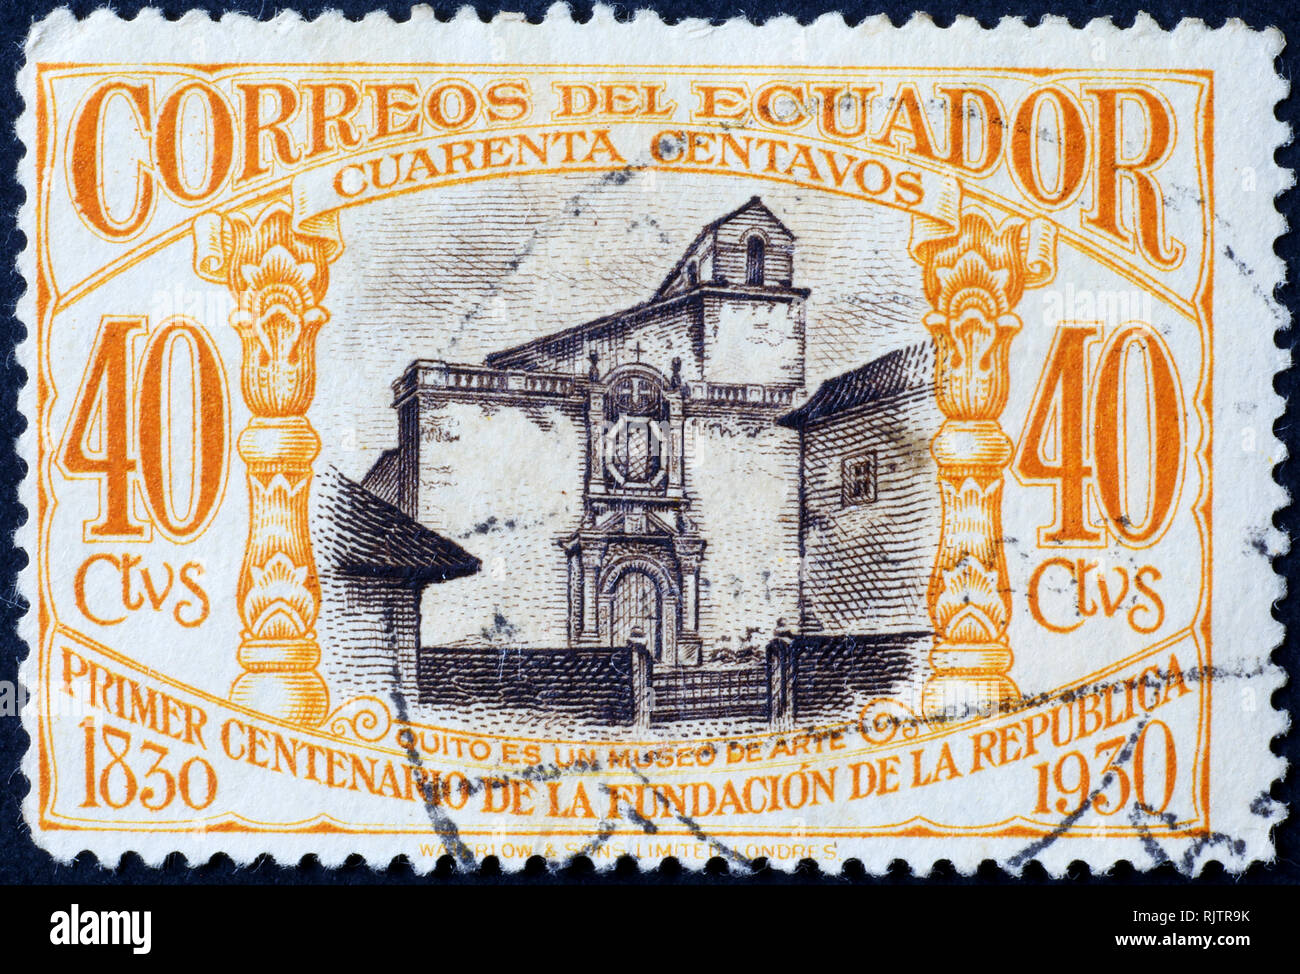 Church of Quito on beautiful vintage postage stamp Stock Photo